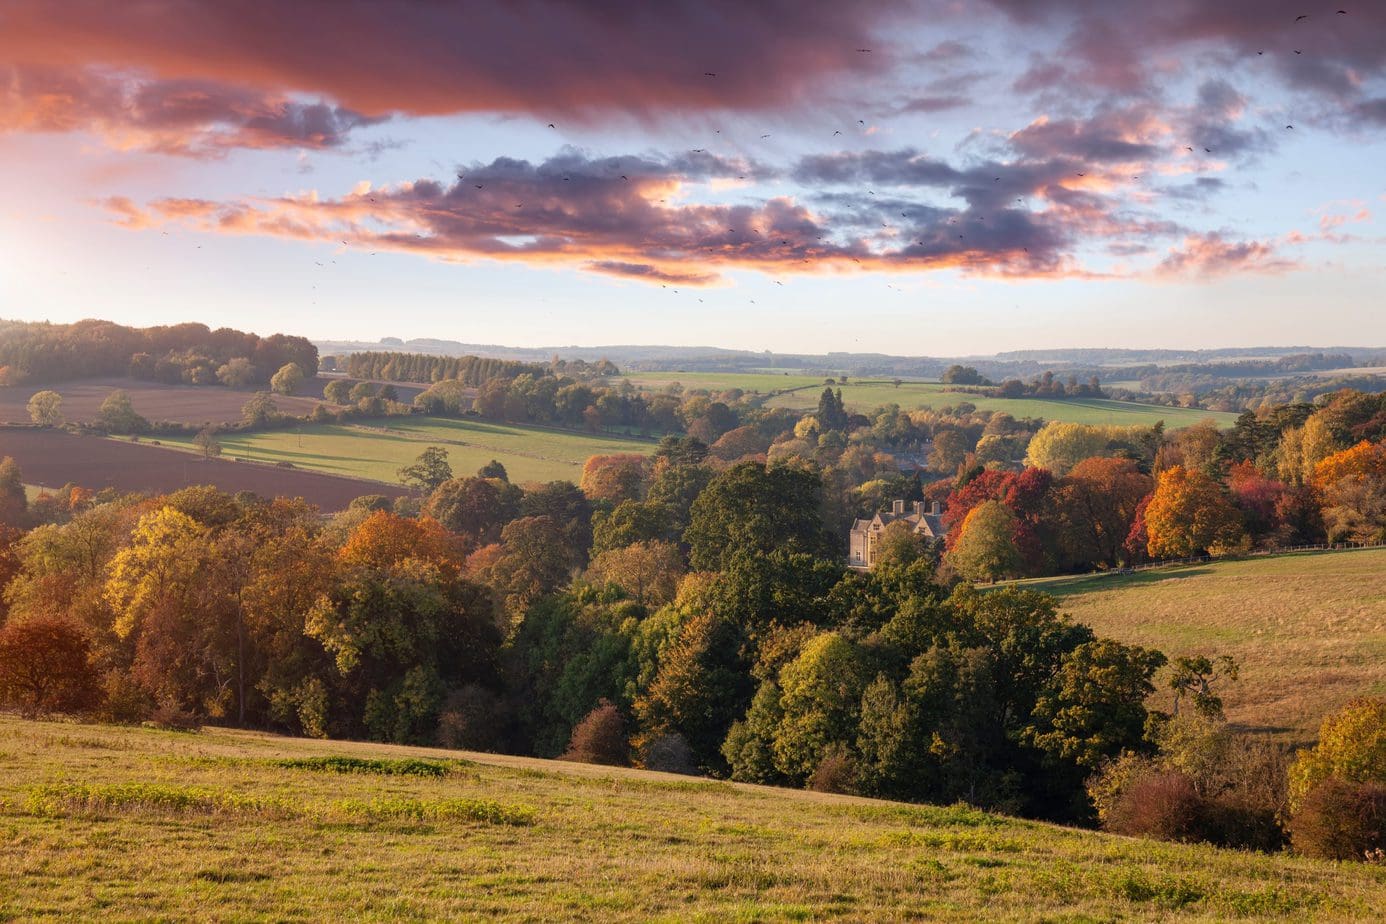 View of woodland and fields with a sunset sky above - driving in the cotswolds itinerary